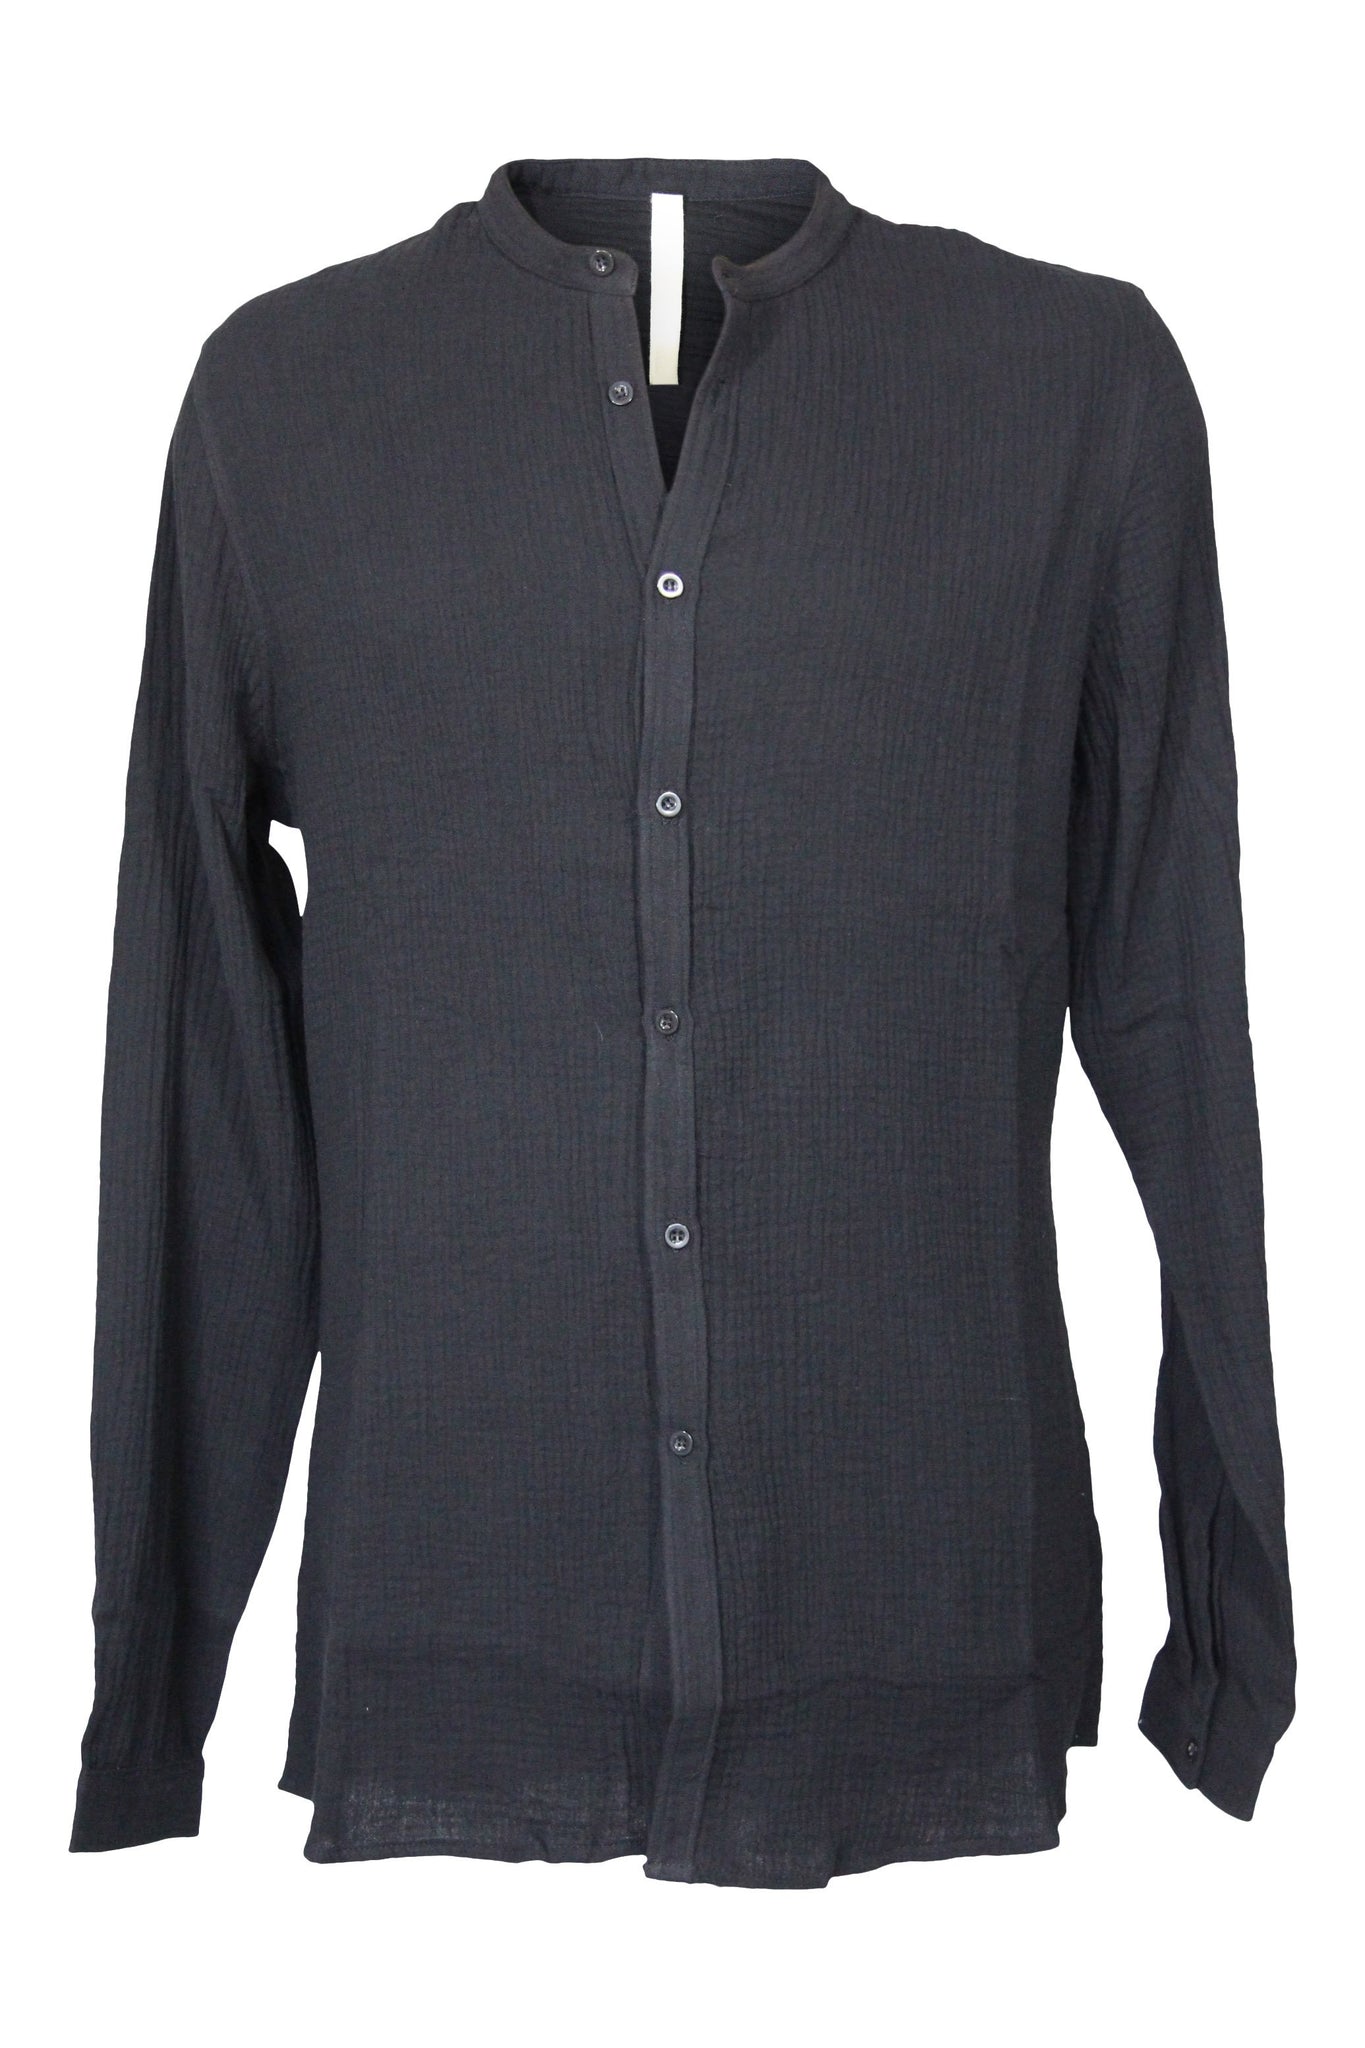 WDTS Mens Elford Buttoned Cotton Shirt